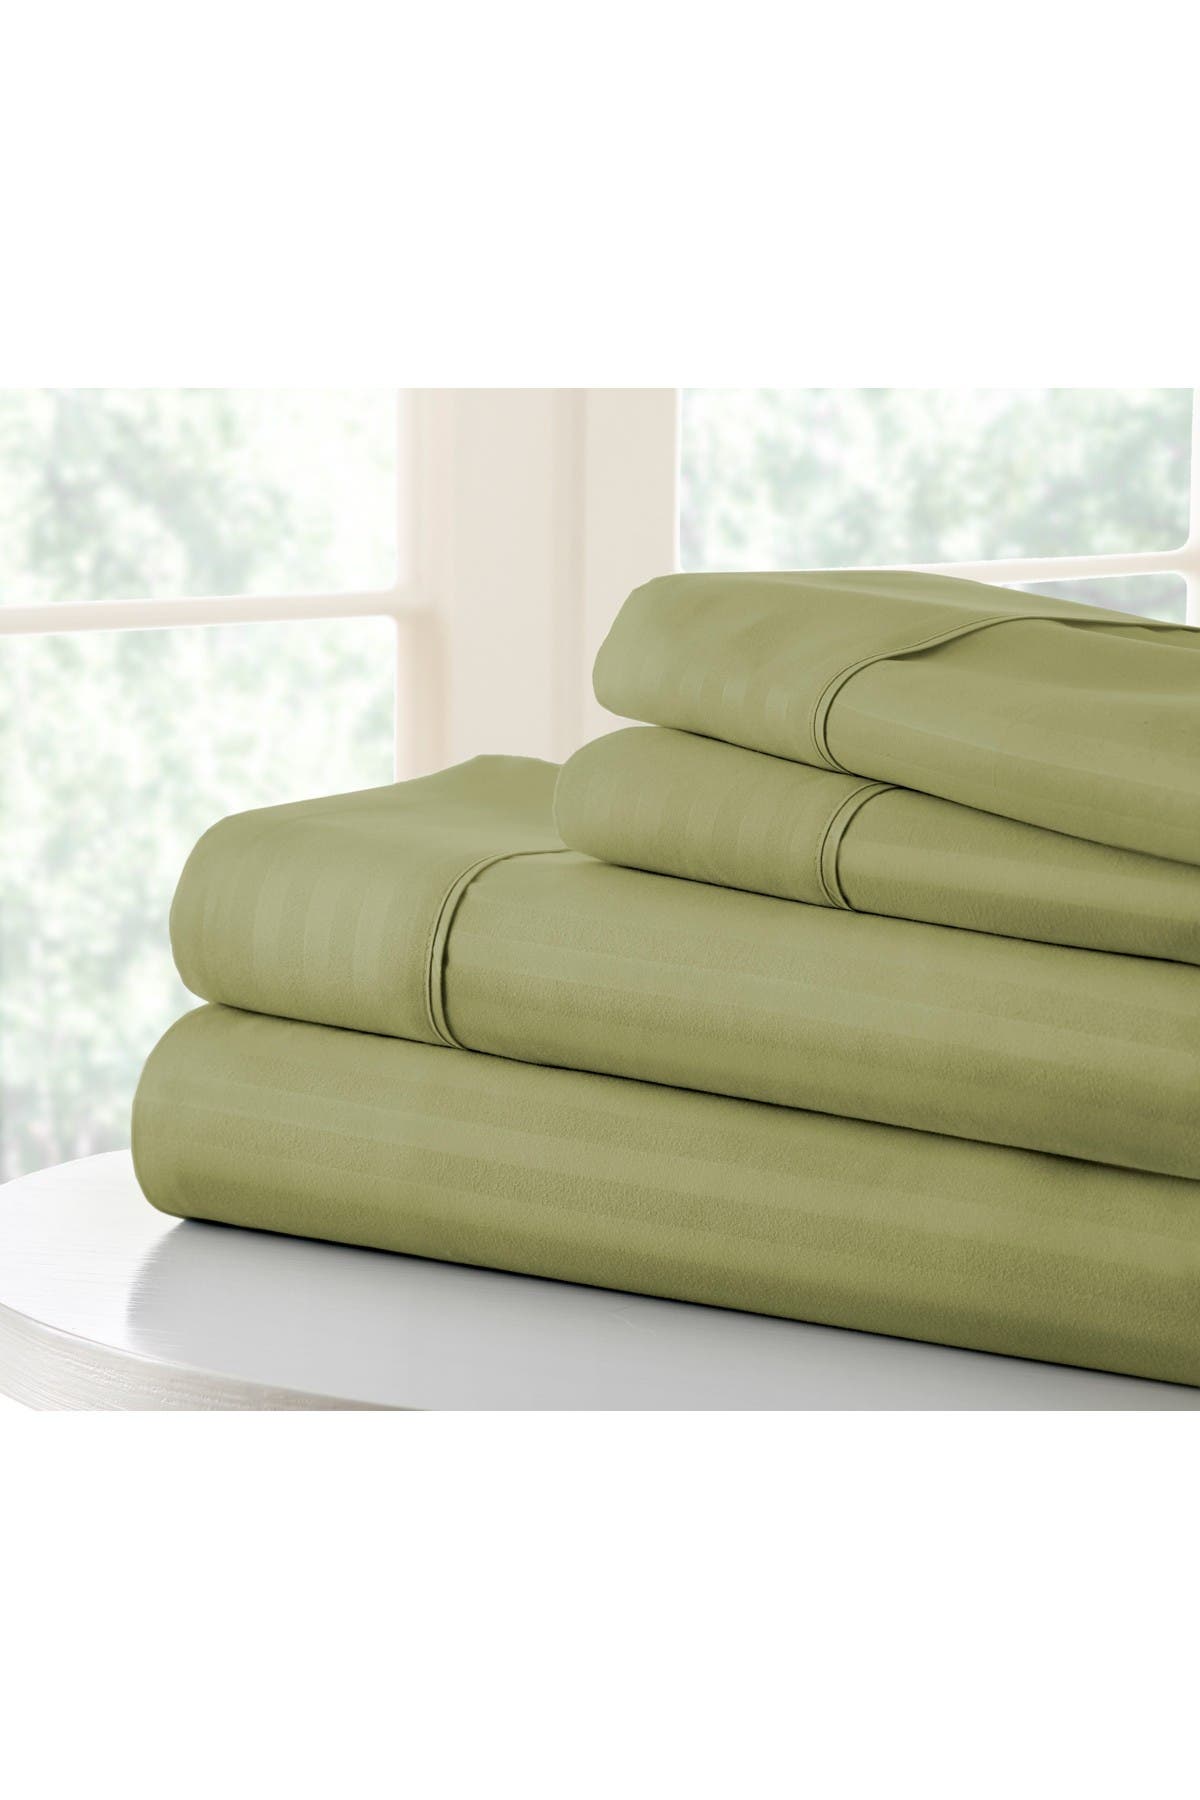 Ienjoy Home California King Hotel Collection Premium Ultra Soft 4-piece Striped Bed Sheet Set In Green